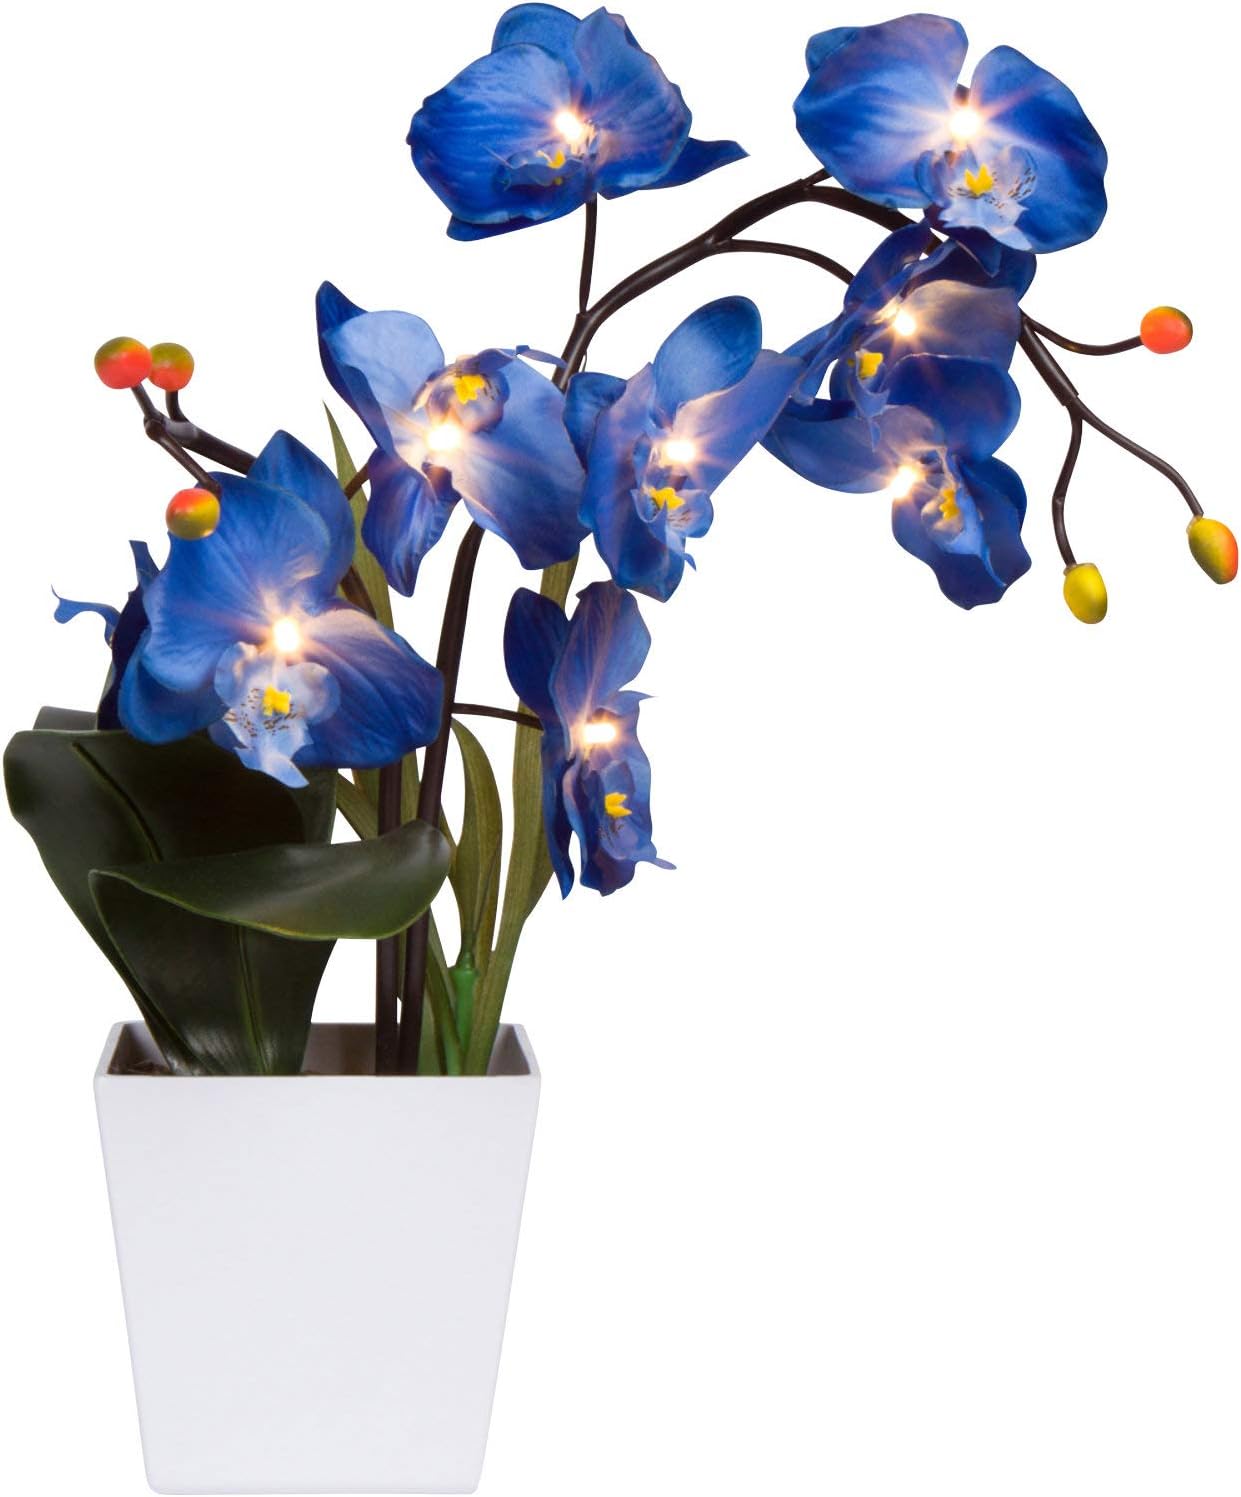 Orchid & Ivy 17-Inch Lighted Blue Artificial Orchid Flower Plant with Timer - Battery Operated with 9 Lights (Blue)